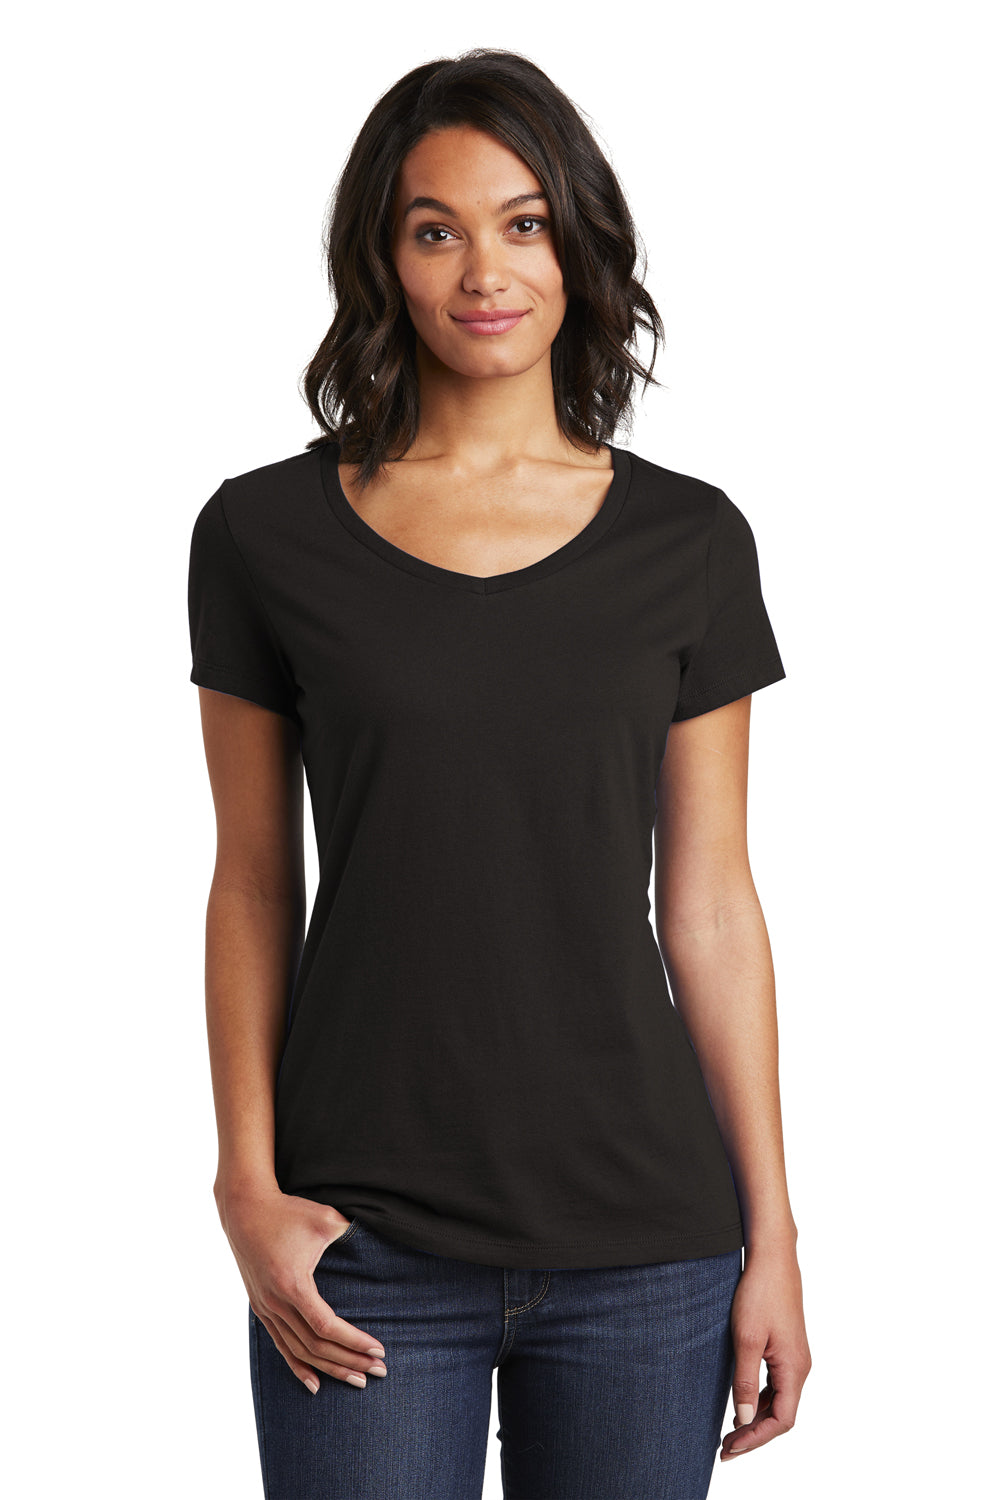 District DT6503 Womens Very Important Short Sleeve V-Neck T-Shirt Black Front